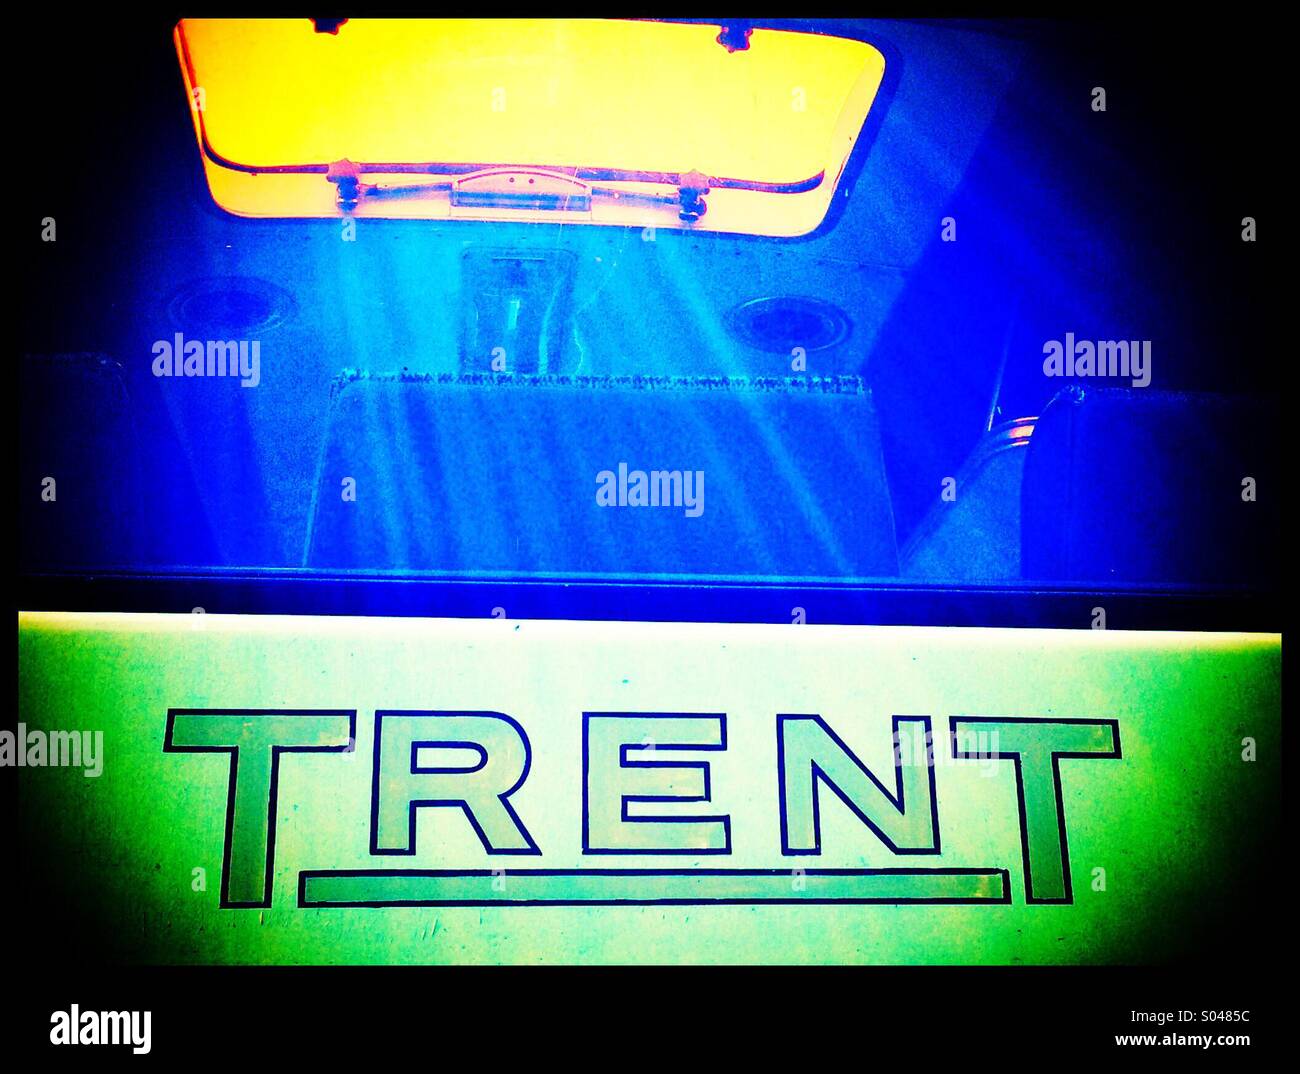 Vintage Trent Barton bus company sign and sunroof Stock Photo